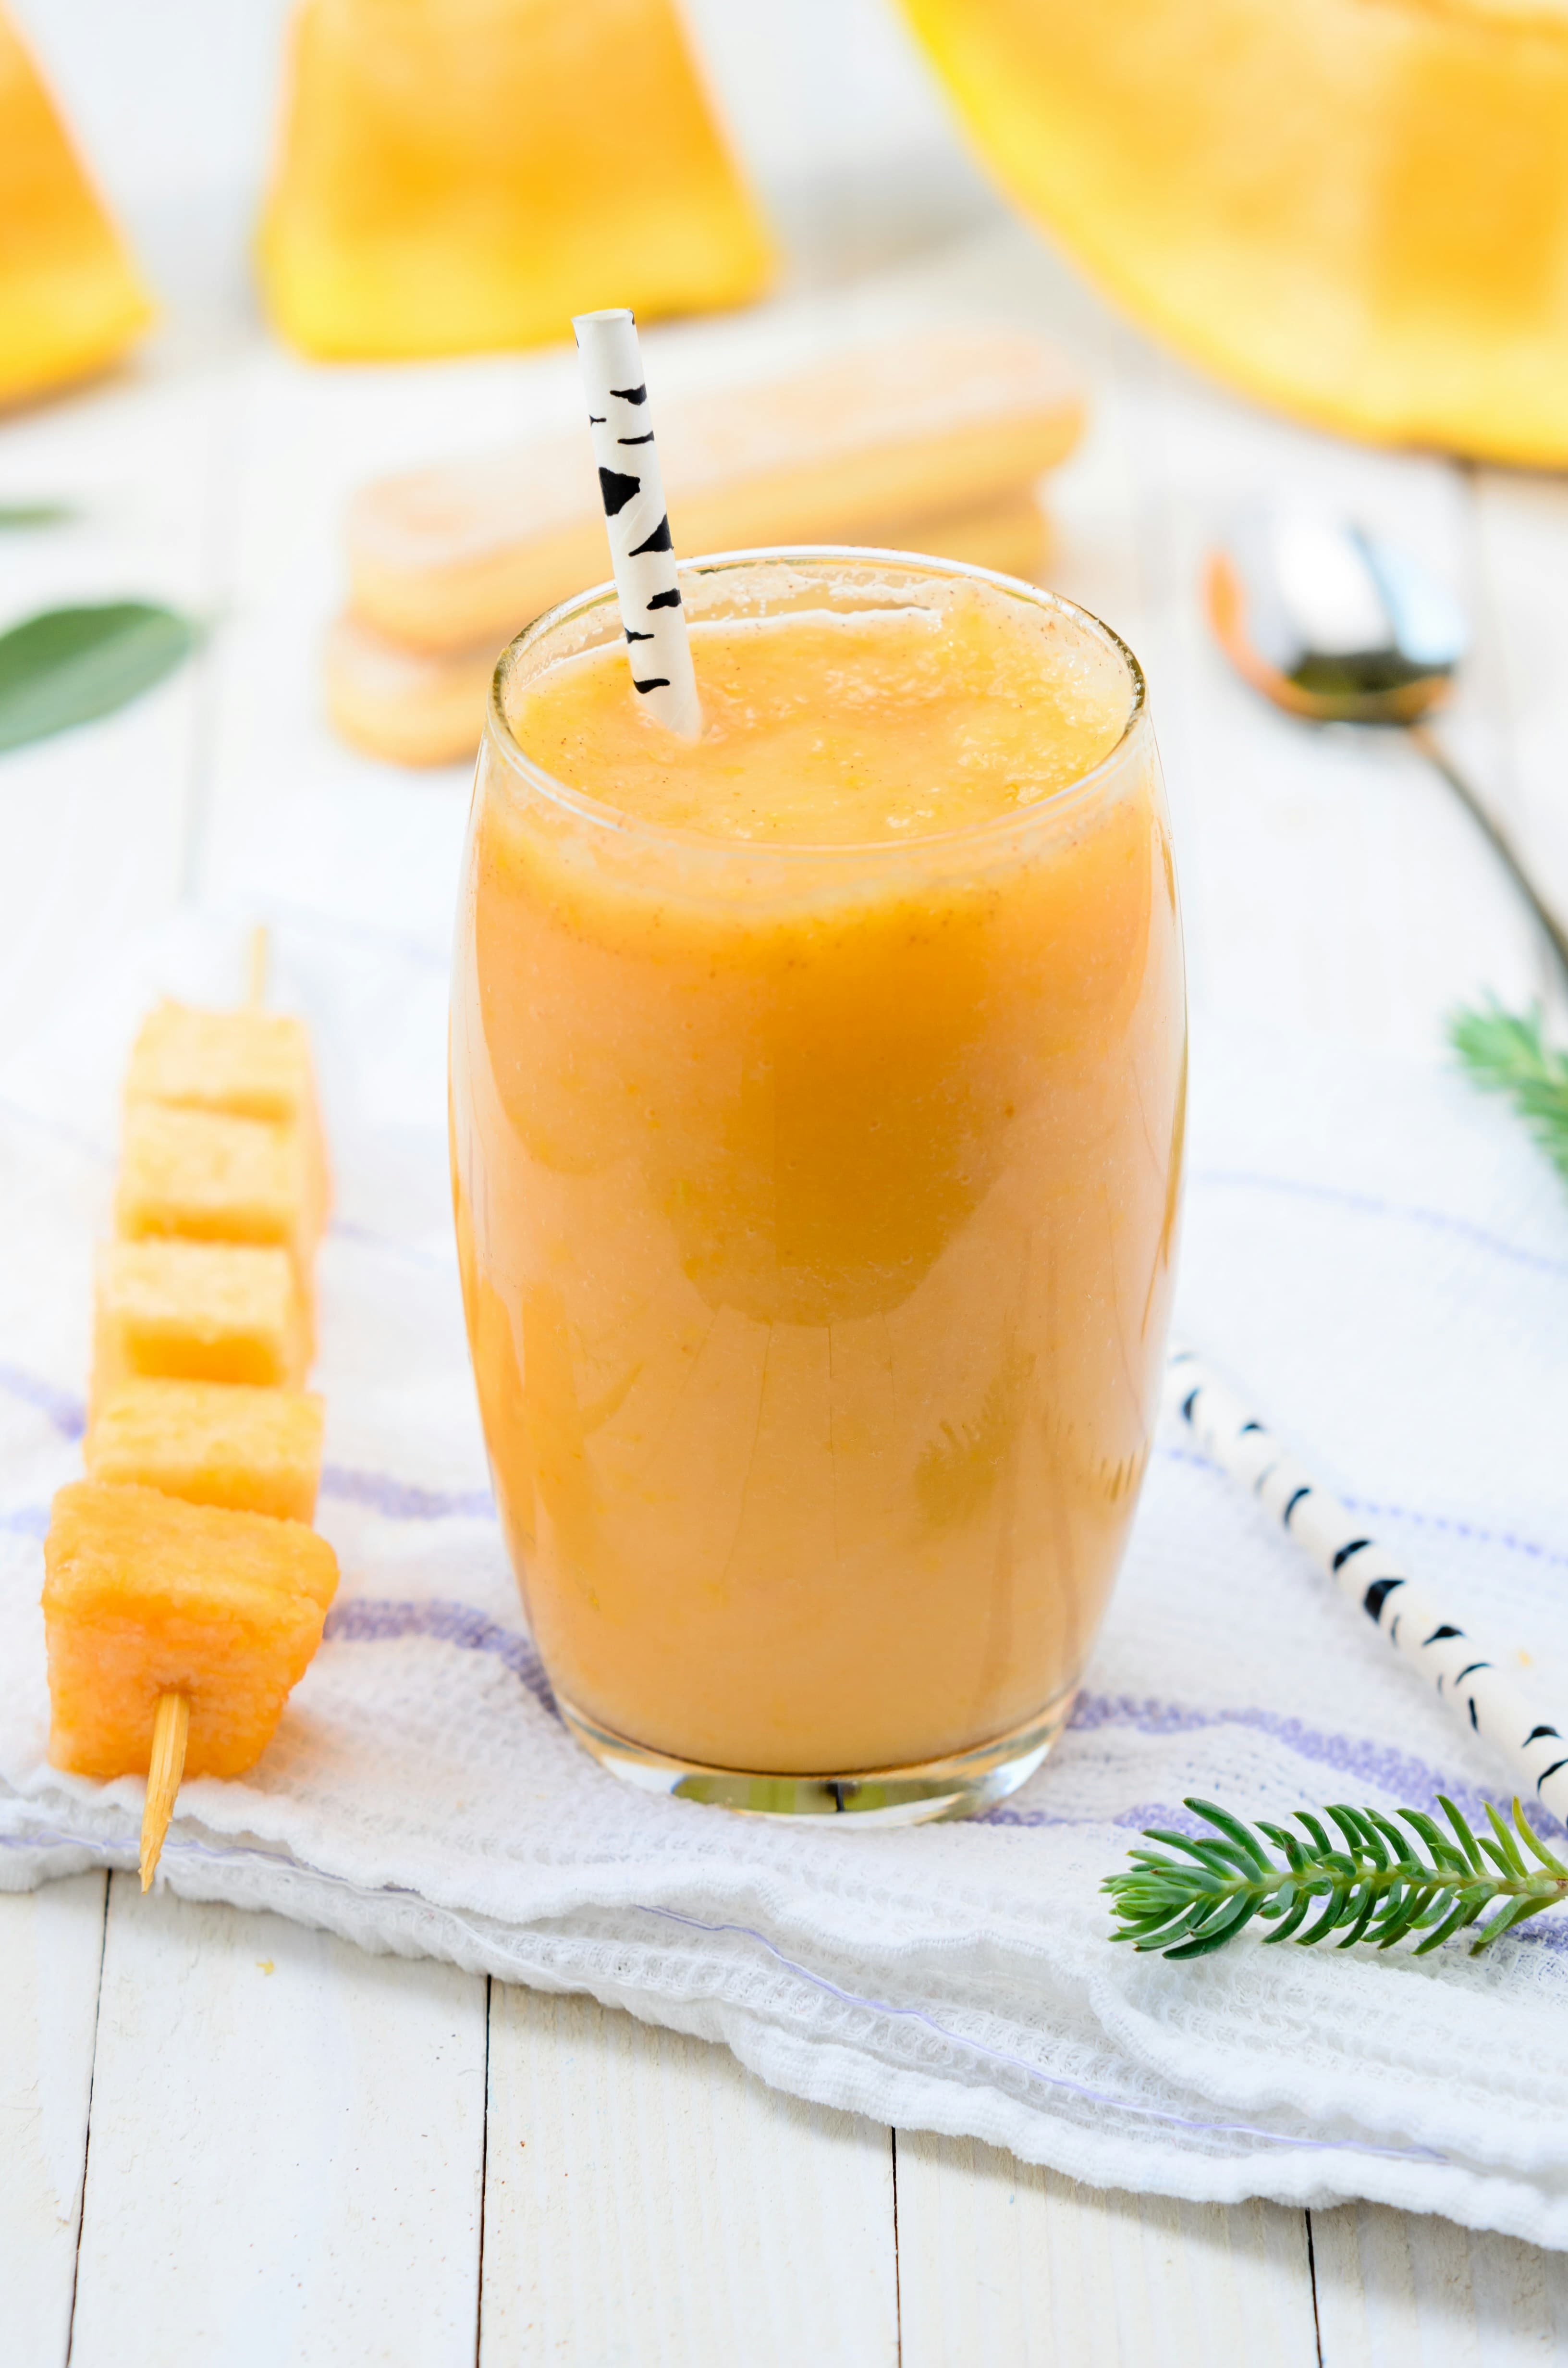 Melon Mania: Refreshing, Iced Cantaloupe And Vodka Spritz For Summer Pool Parties